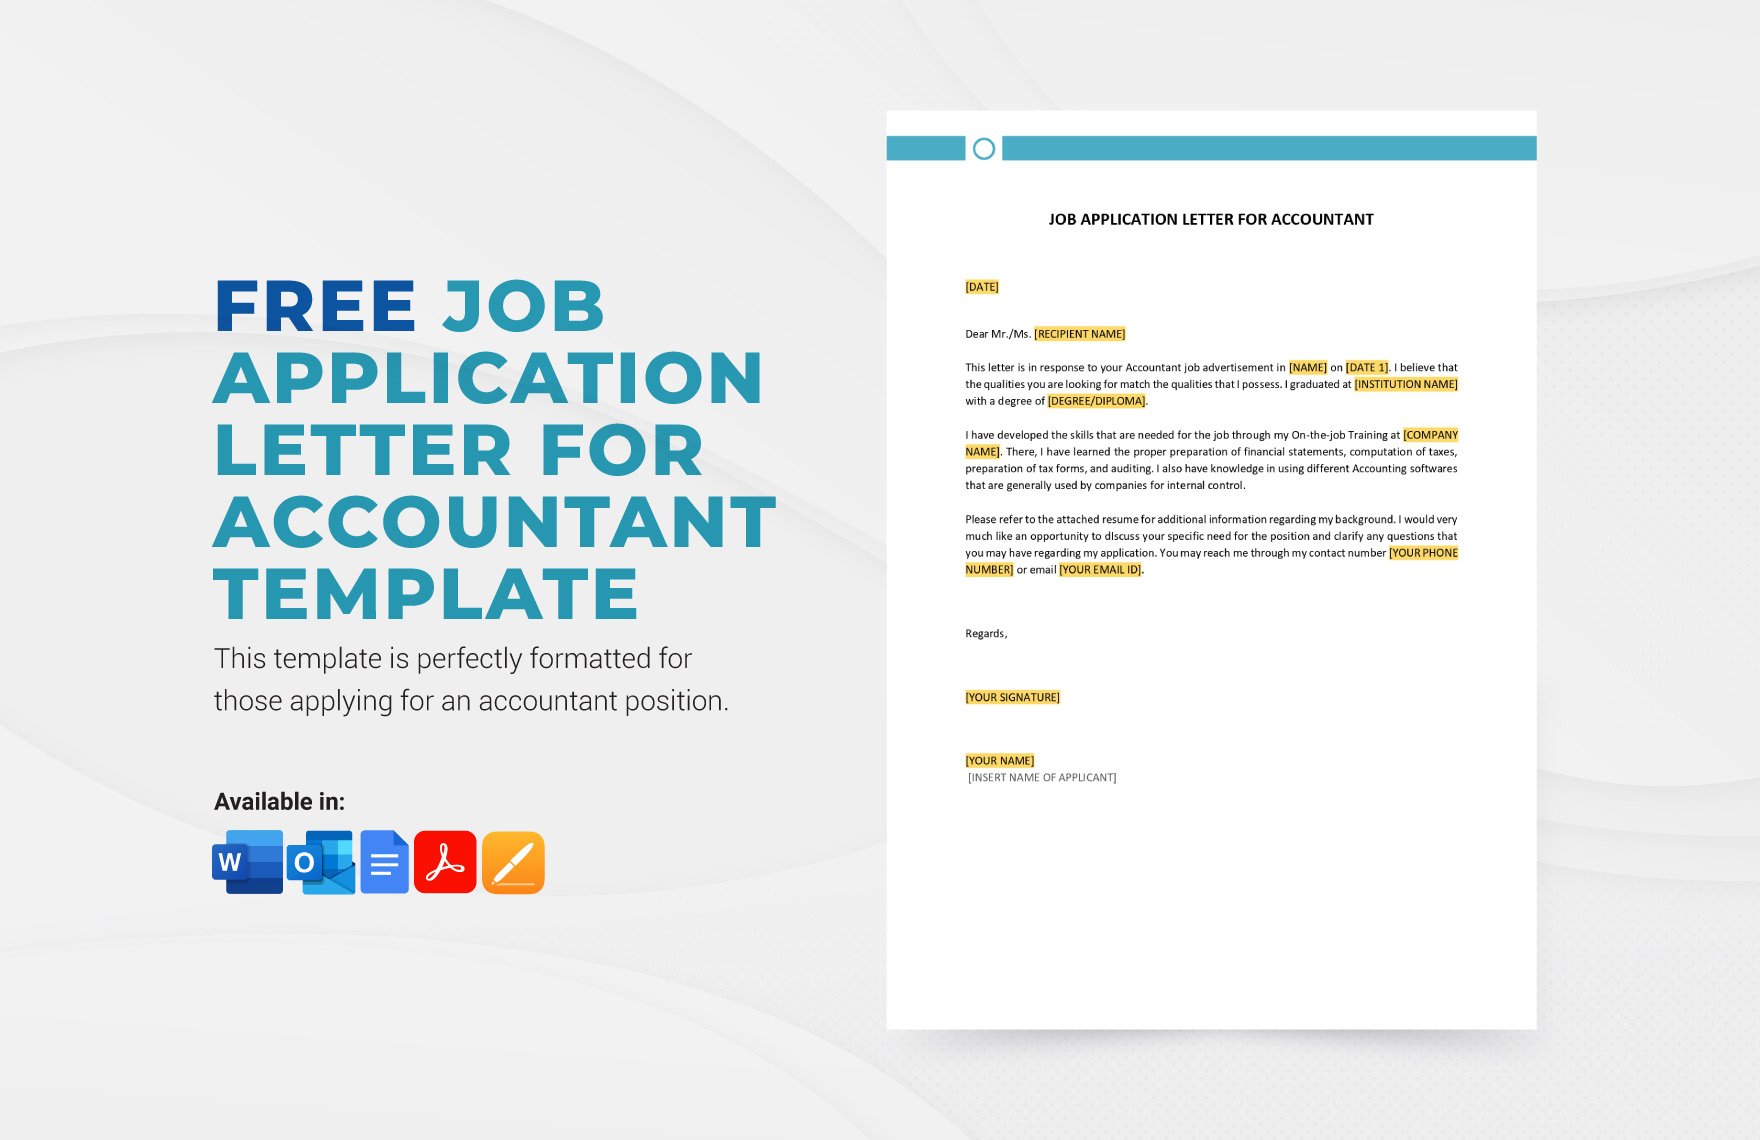 Job Application Letter For Accountant